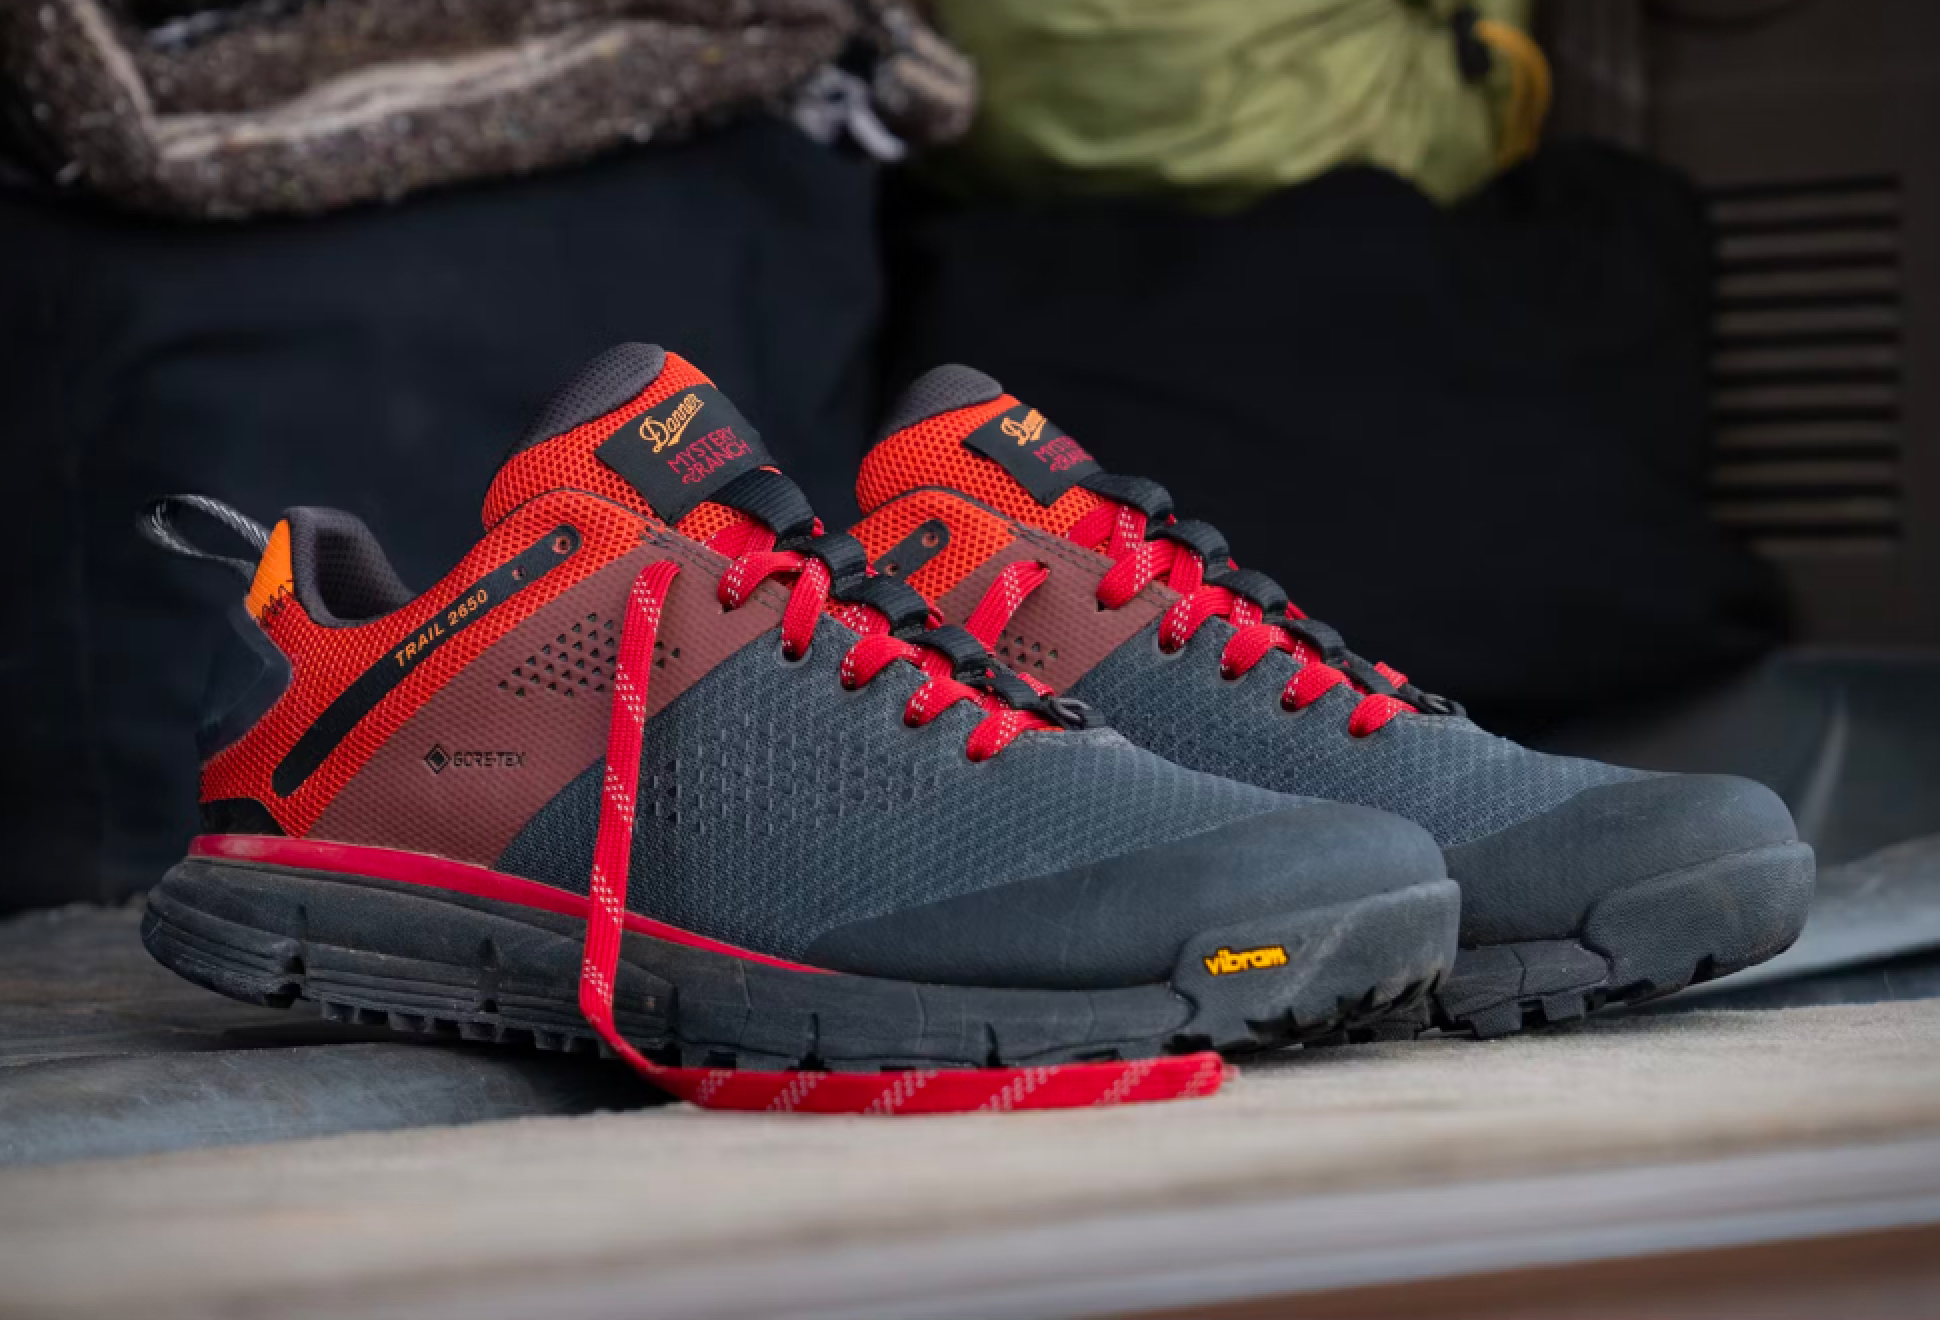 Danner x Mystery Ranch Trail Shoe | Image